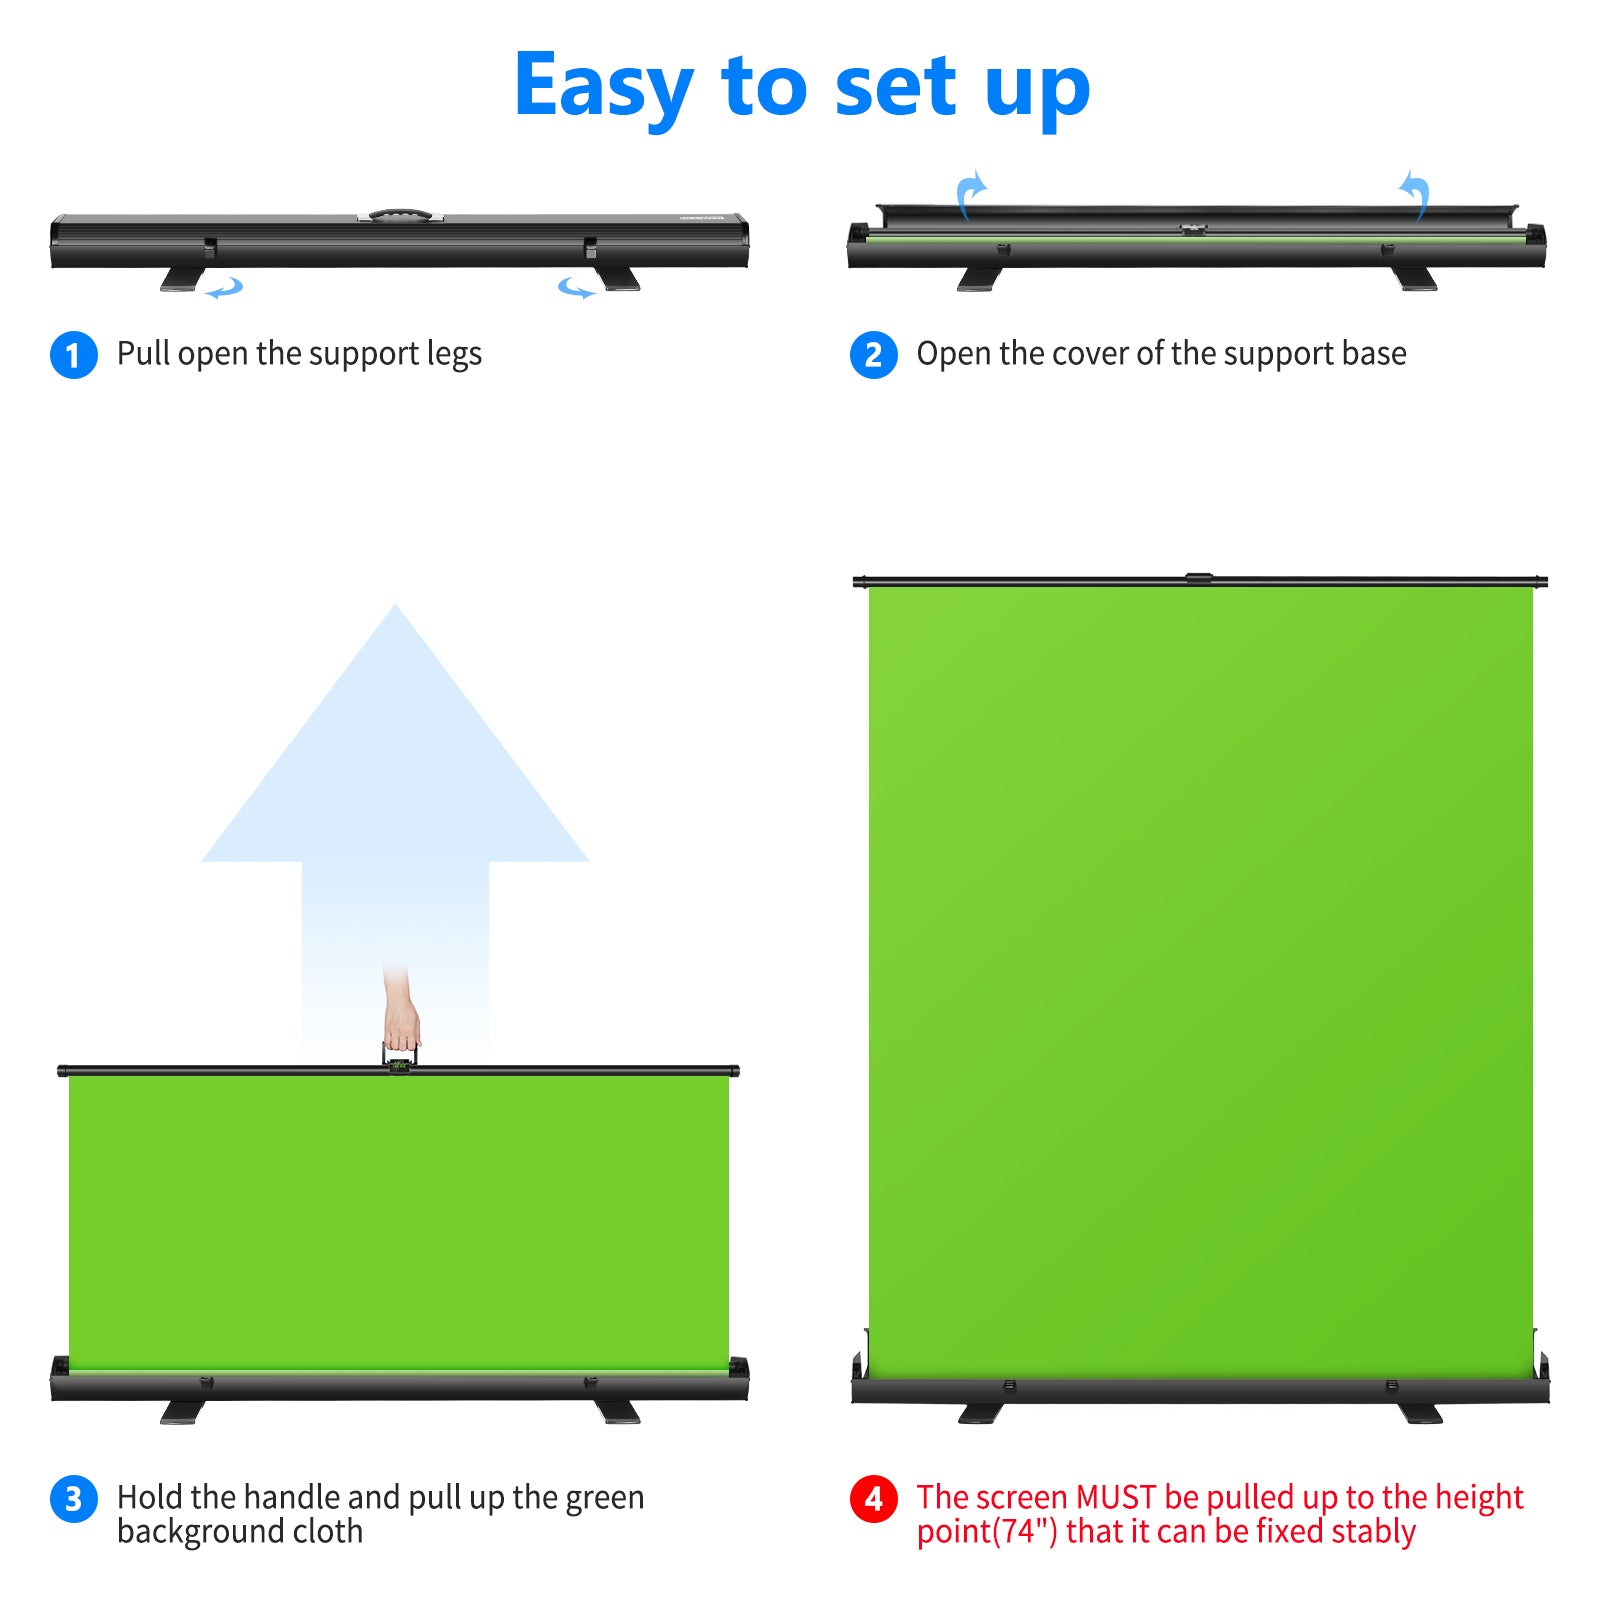 NEEWER 1.52 x1.97M Pull-up Style Backdrop - NEEWER